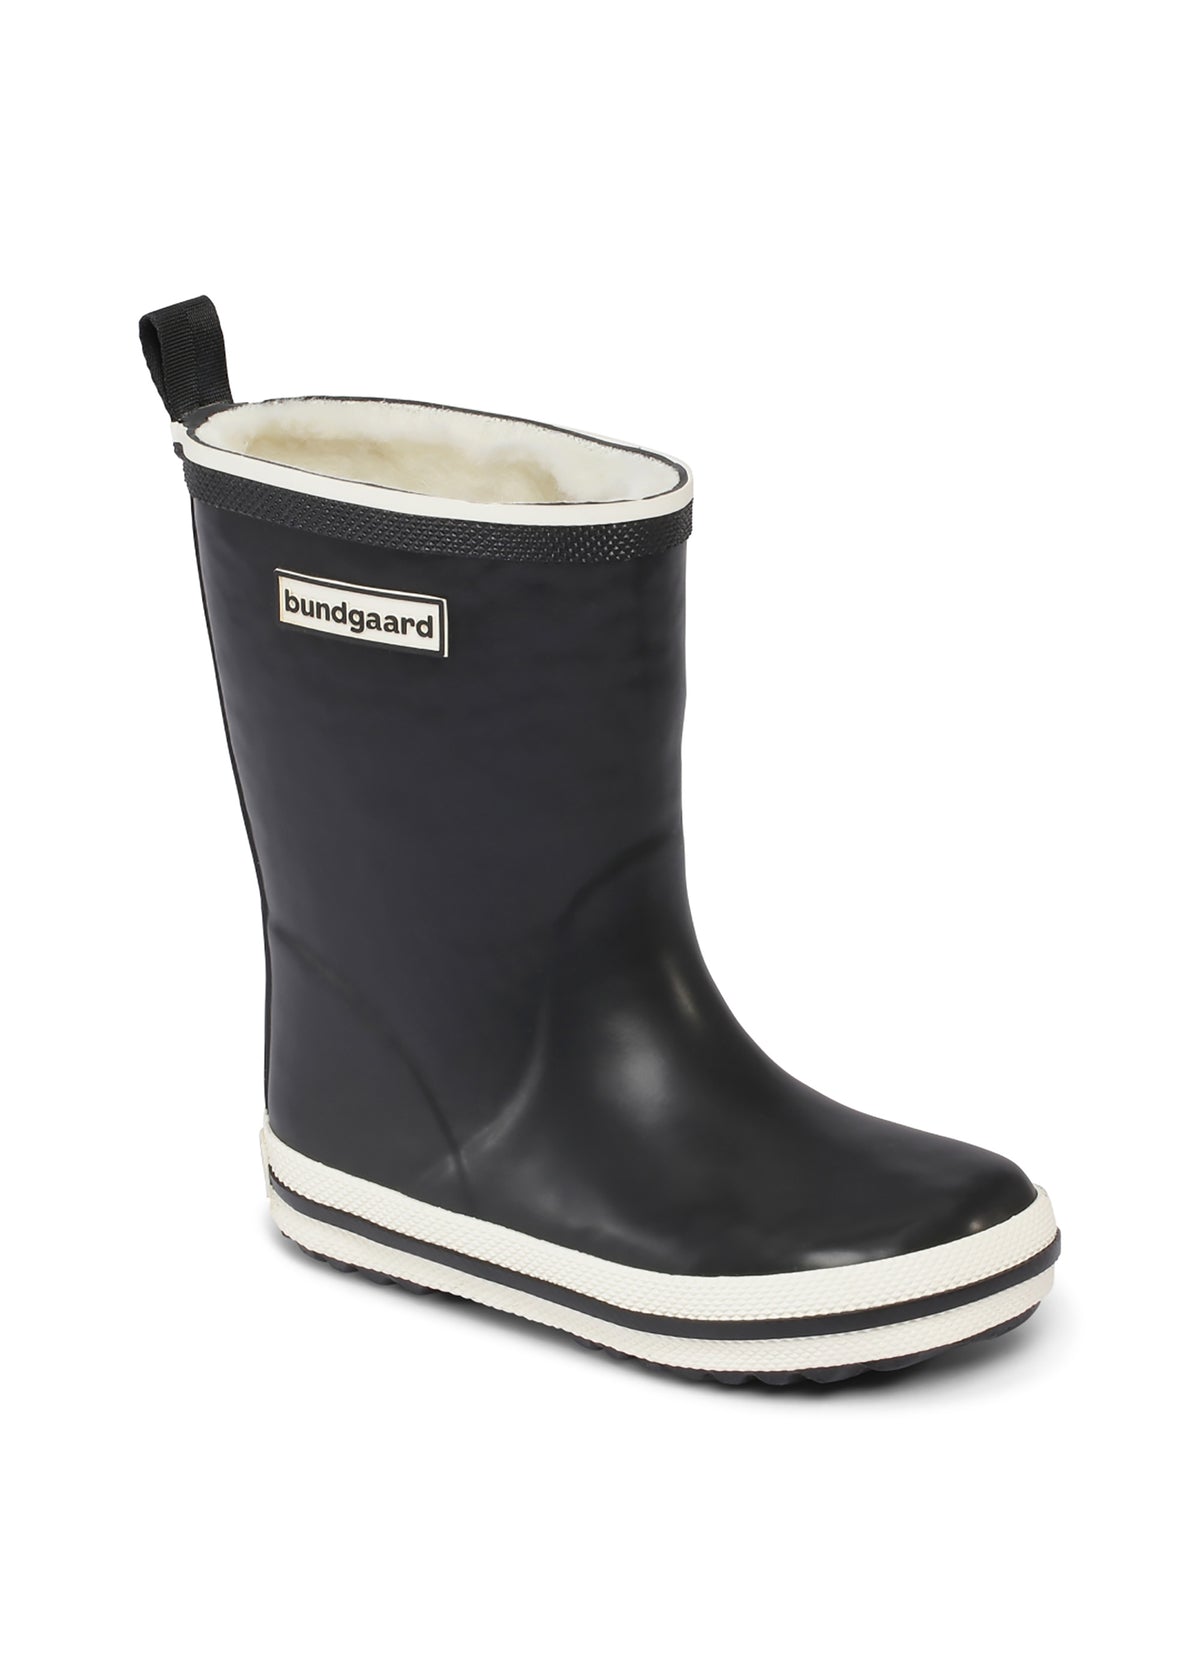 Rubber boots with a warm lining - black, Charly High Warm